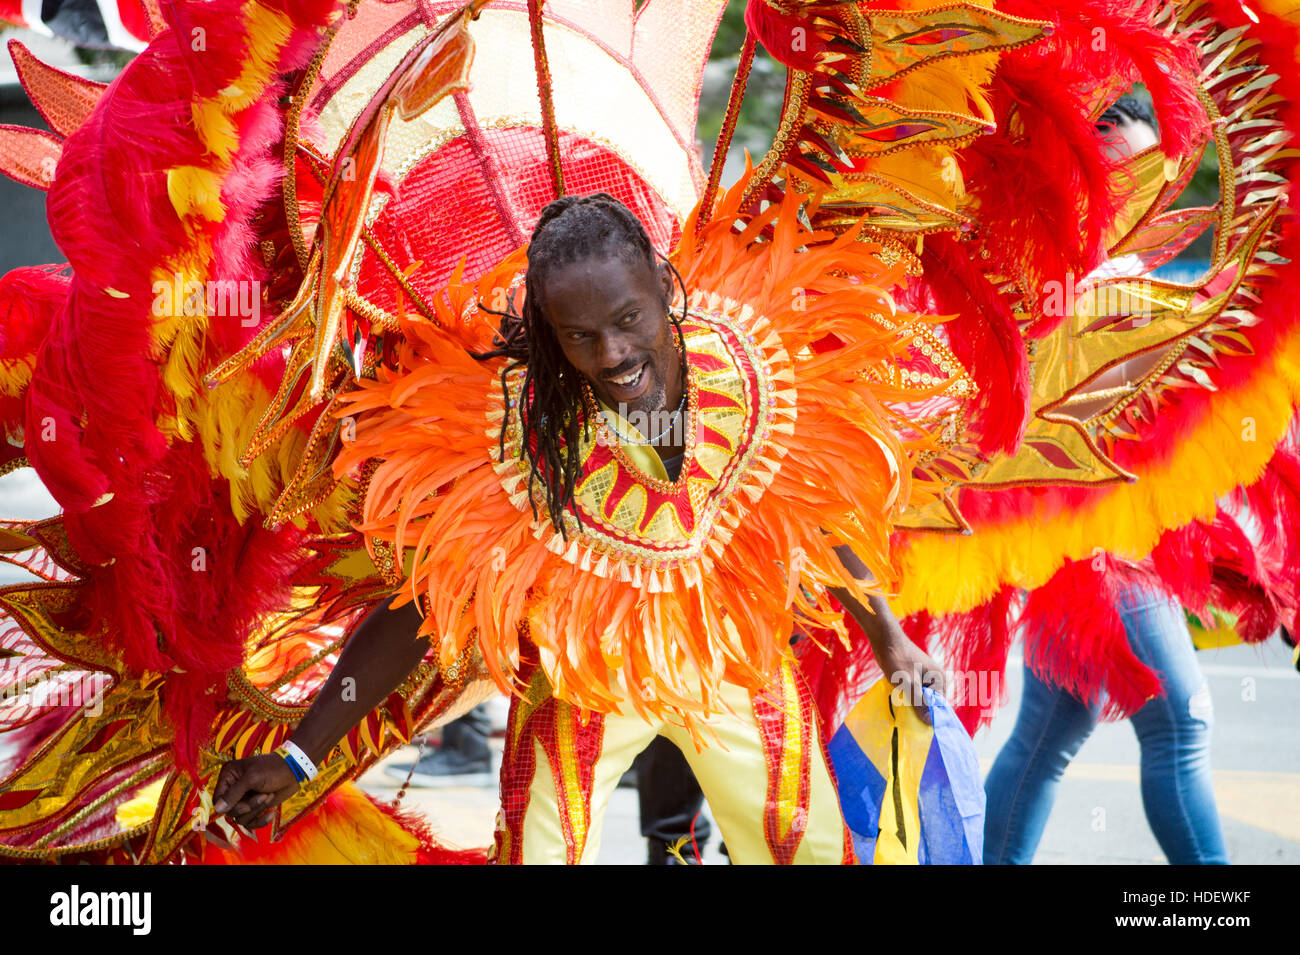 West Indian Day Parade in Brooklyn, New York Stock Photo - Alamy